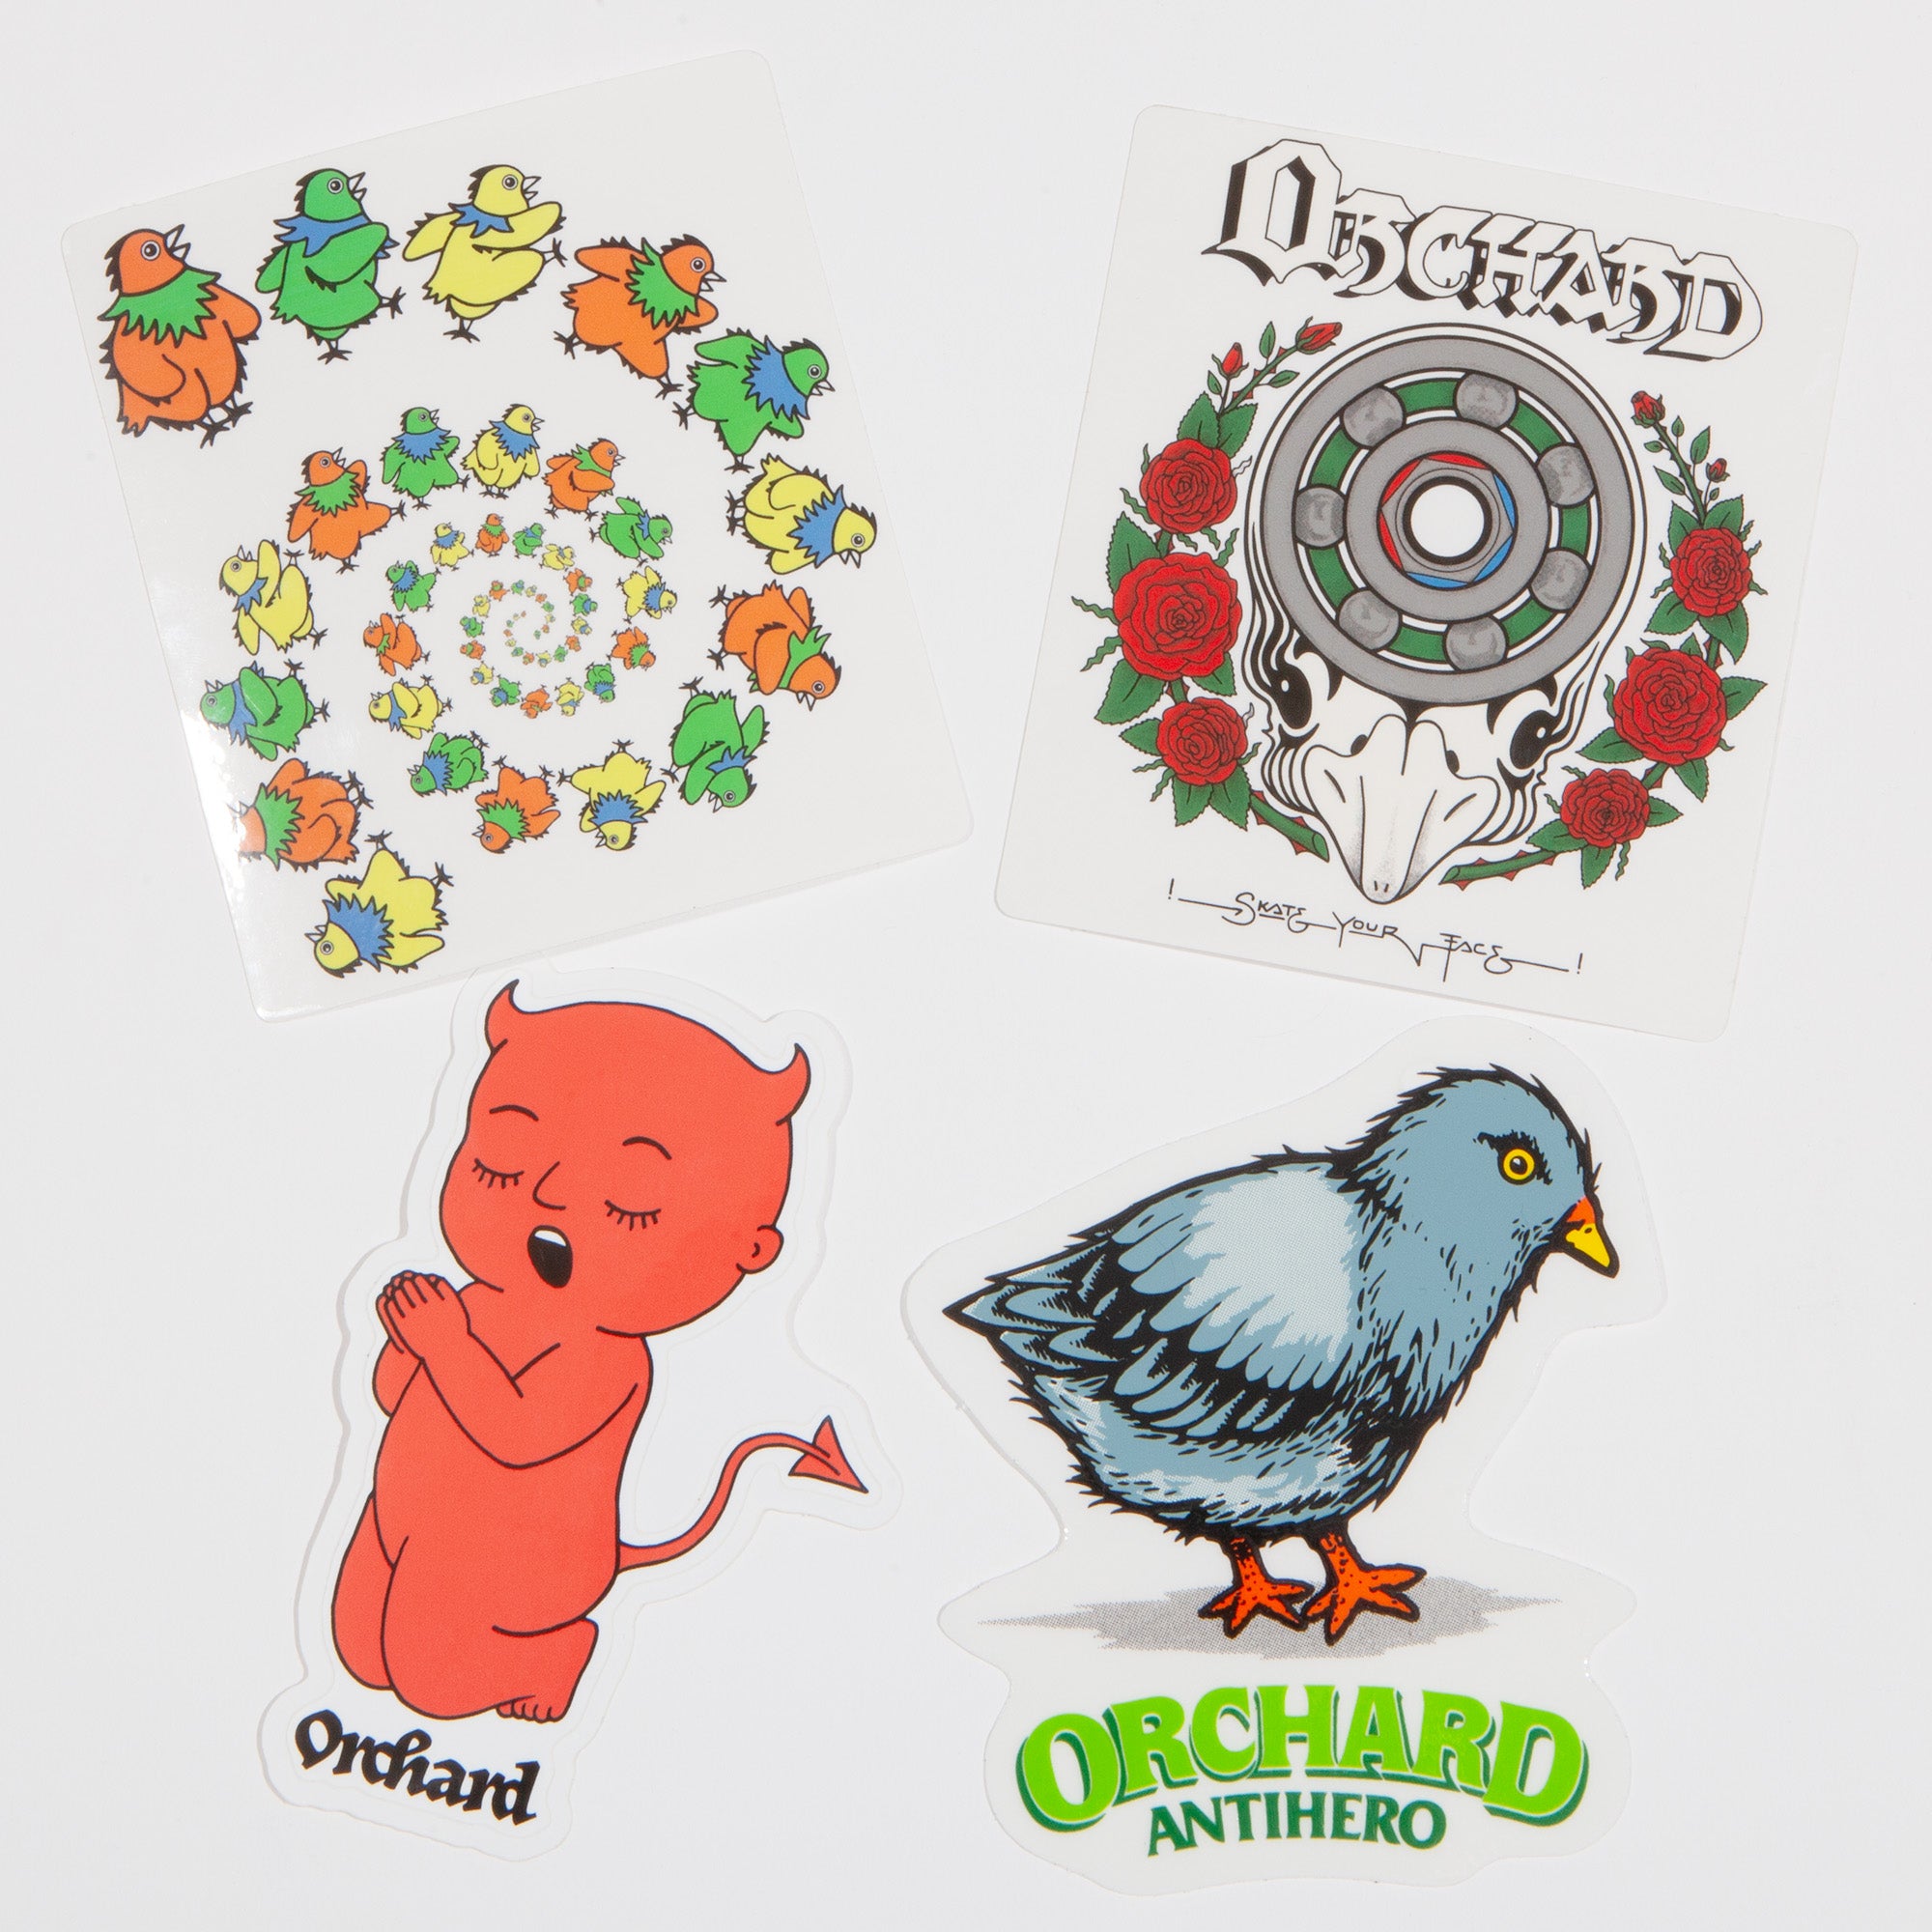 Orchard 18th Anniversary Sticker Pack